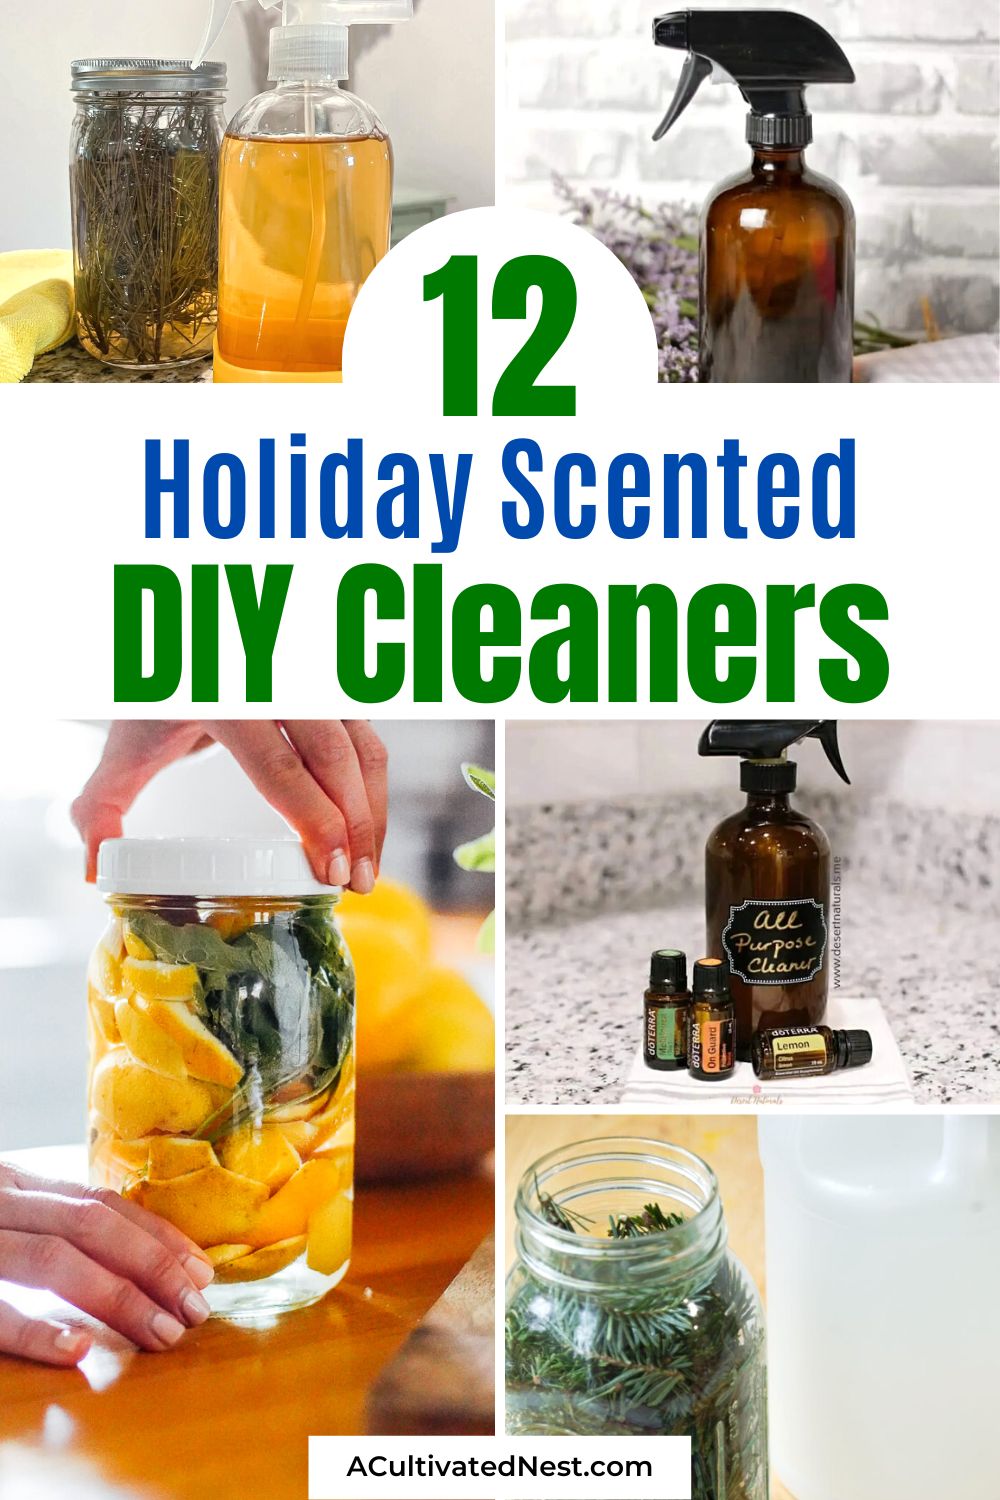 12 Charming DIY Cleaners for the Holidays- Turn holiday cleaning into a joyful and frugal activity! Explore our collection of charming DIY cleaners for the holidays to make your home sparkle with a touch of festive flair. Create, clean, and celebrate with a dash of homemade charm! | #homemadeCleaners #diyCleaners #DIY #cleaning #ACultivatedNest